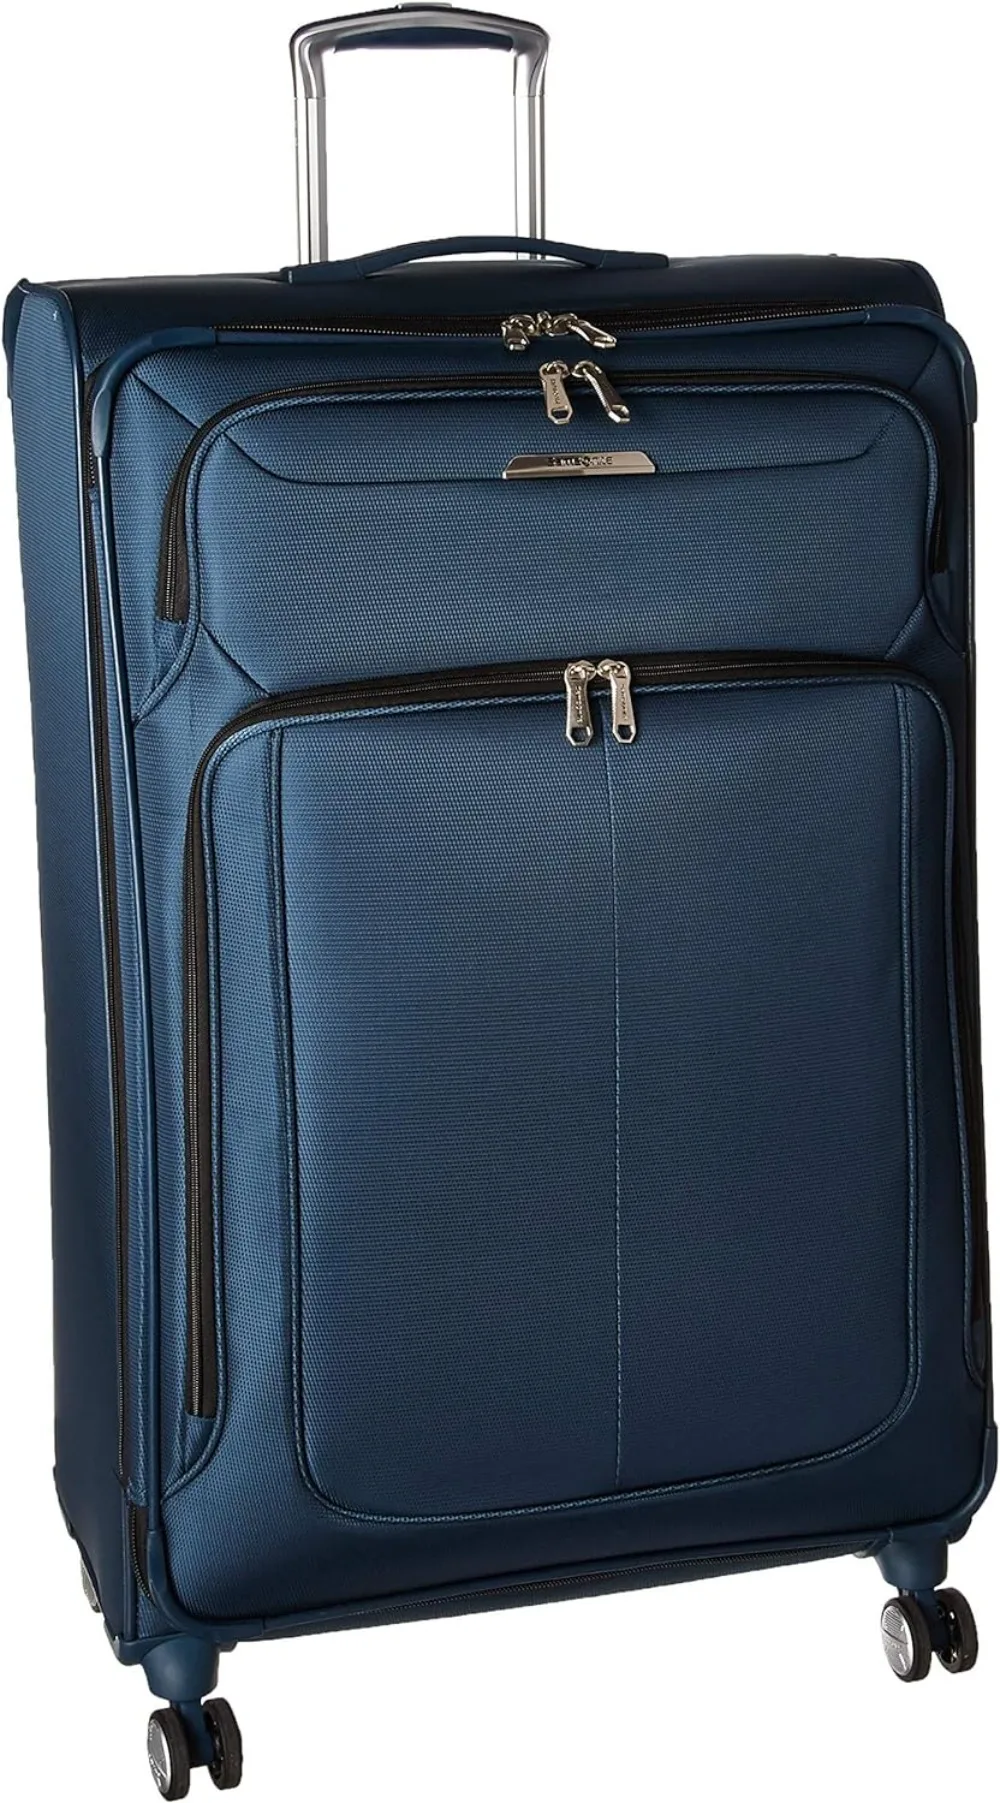 

Samsonite Solyte DLX Softside Expandable Luggage with Spinner Wheels, Mediterranean Blue, Checked-Large 29-Inch